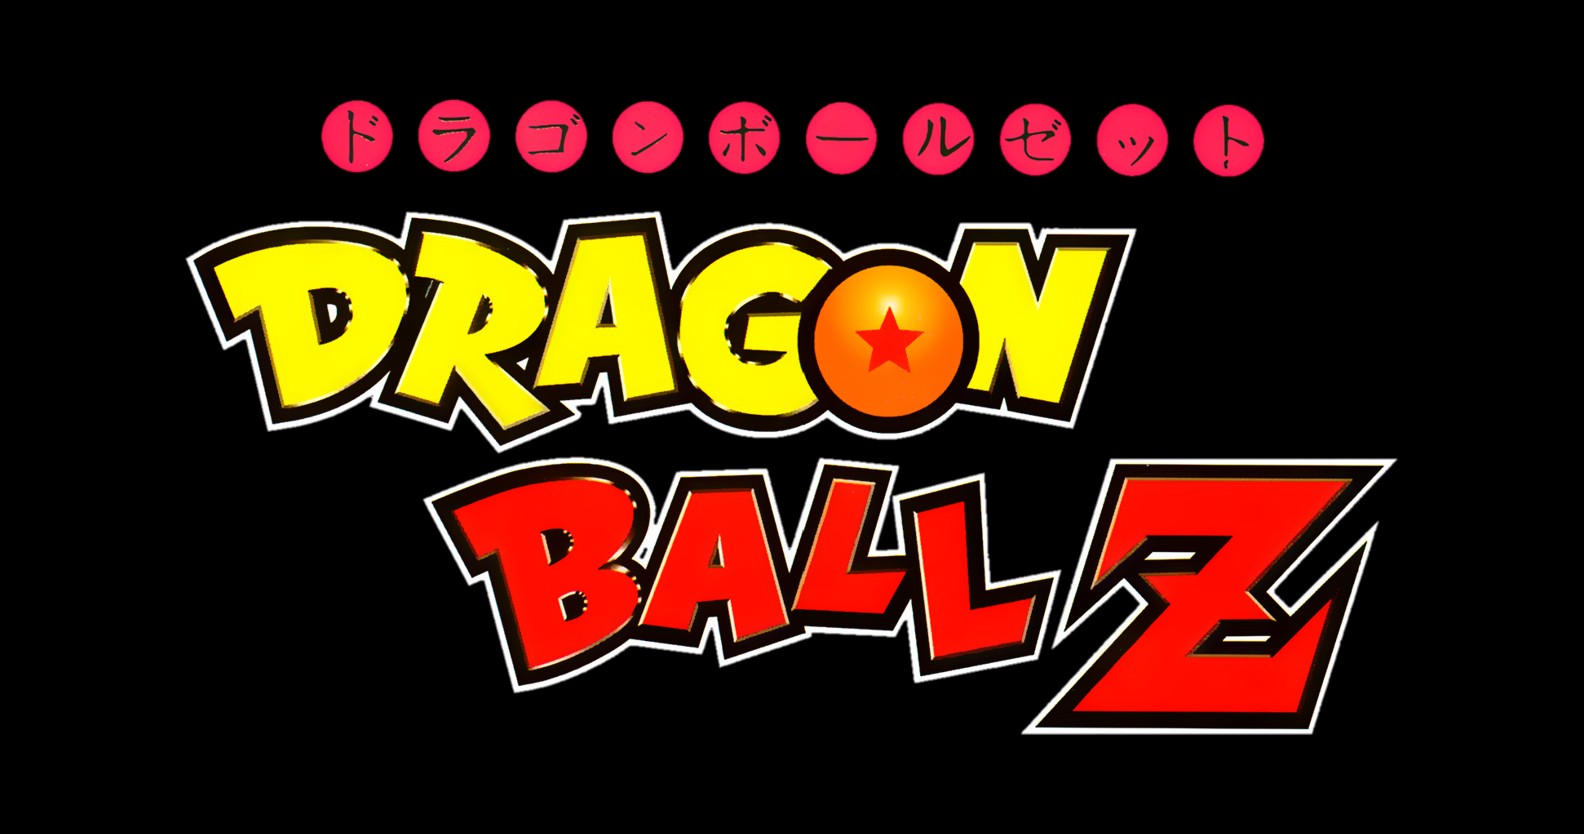 Dragon Ball Z Logo 368 Hd Wallpapers Background in Logos   Imagesci 1584x834